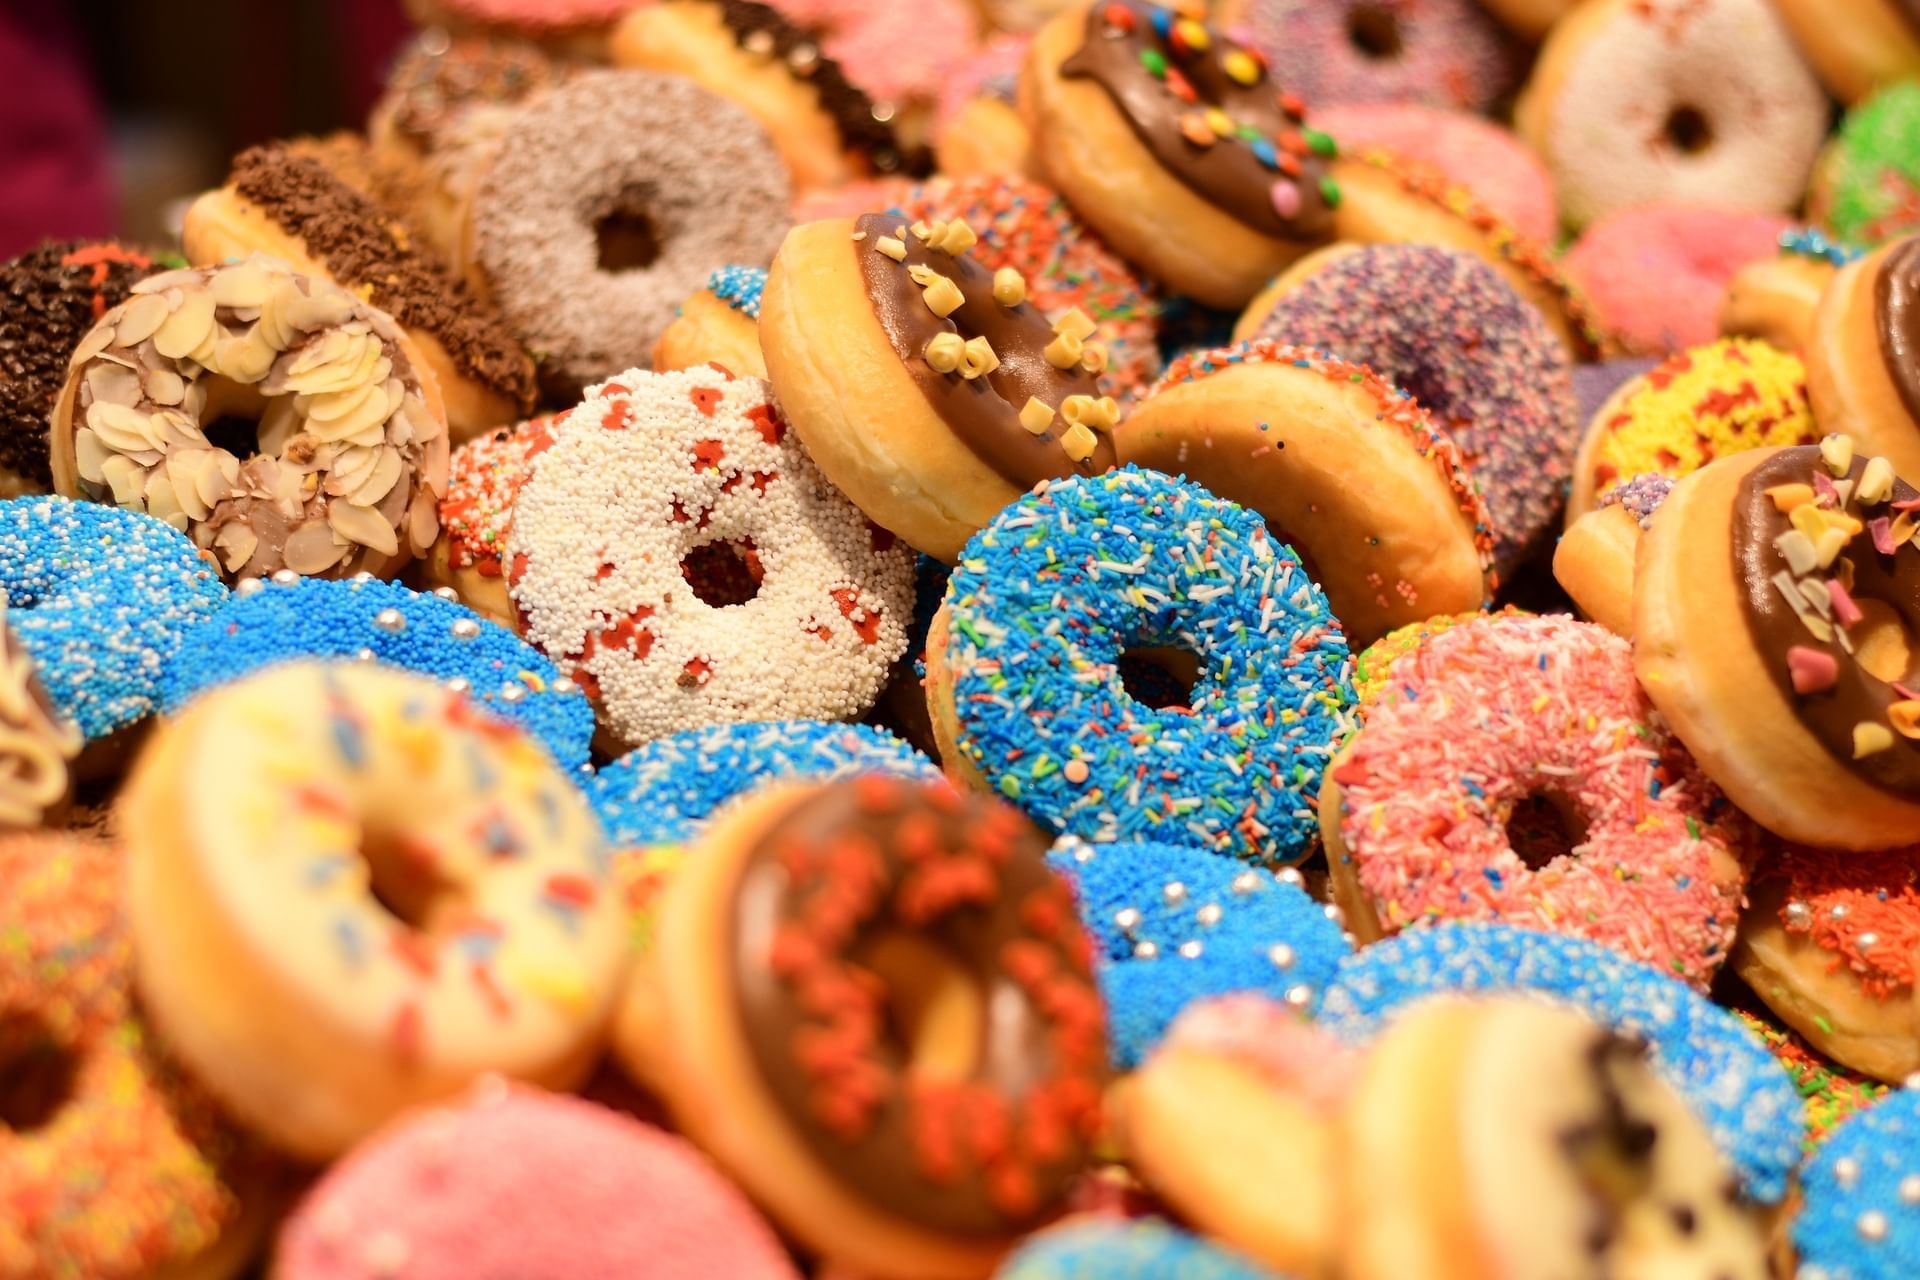 A bunch of donuts with vibrant colored frosting topped with sugary sprinkles.